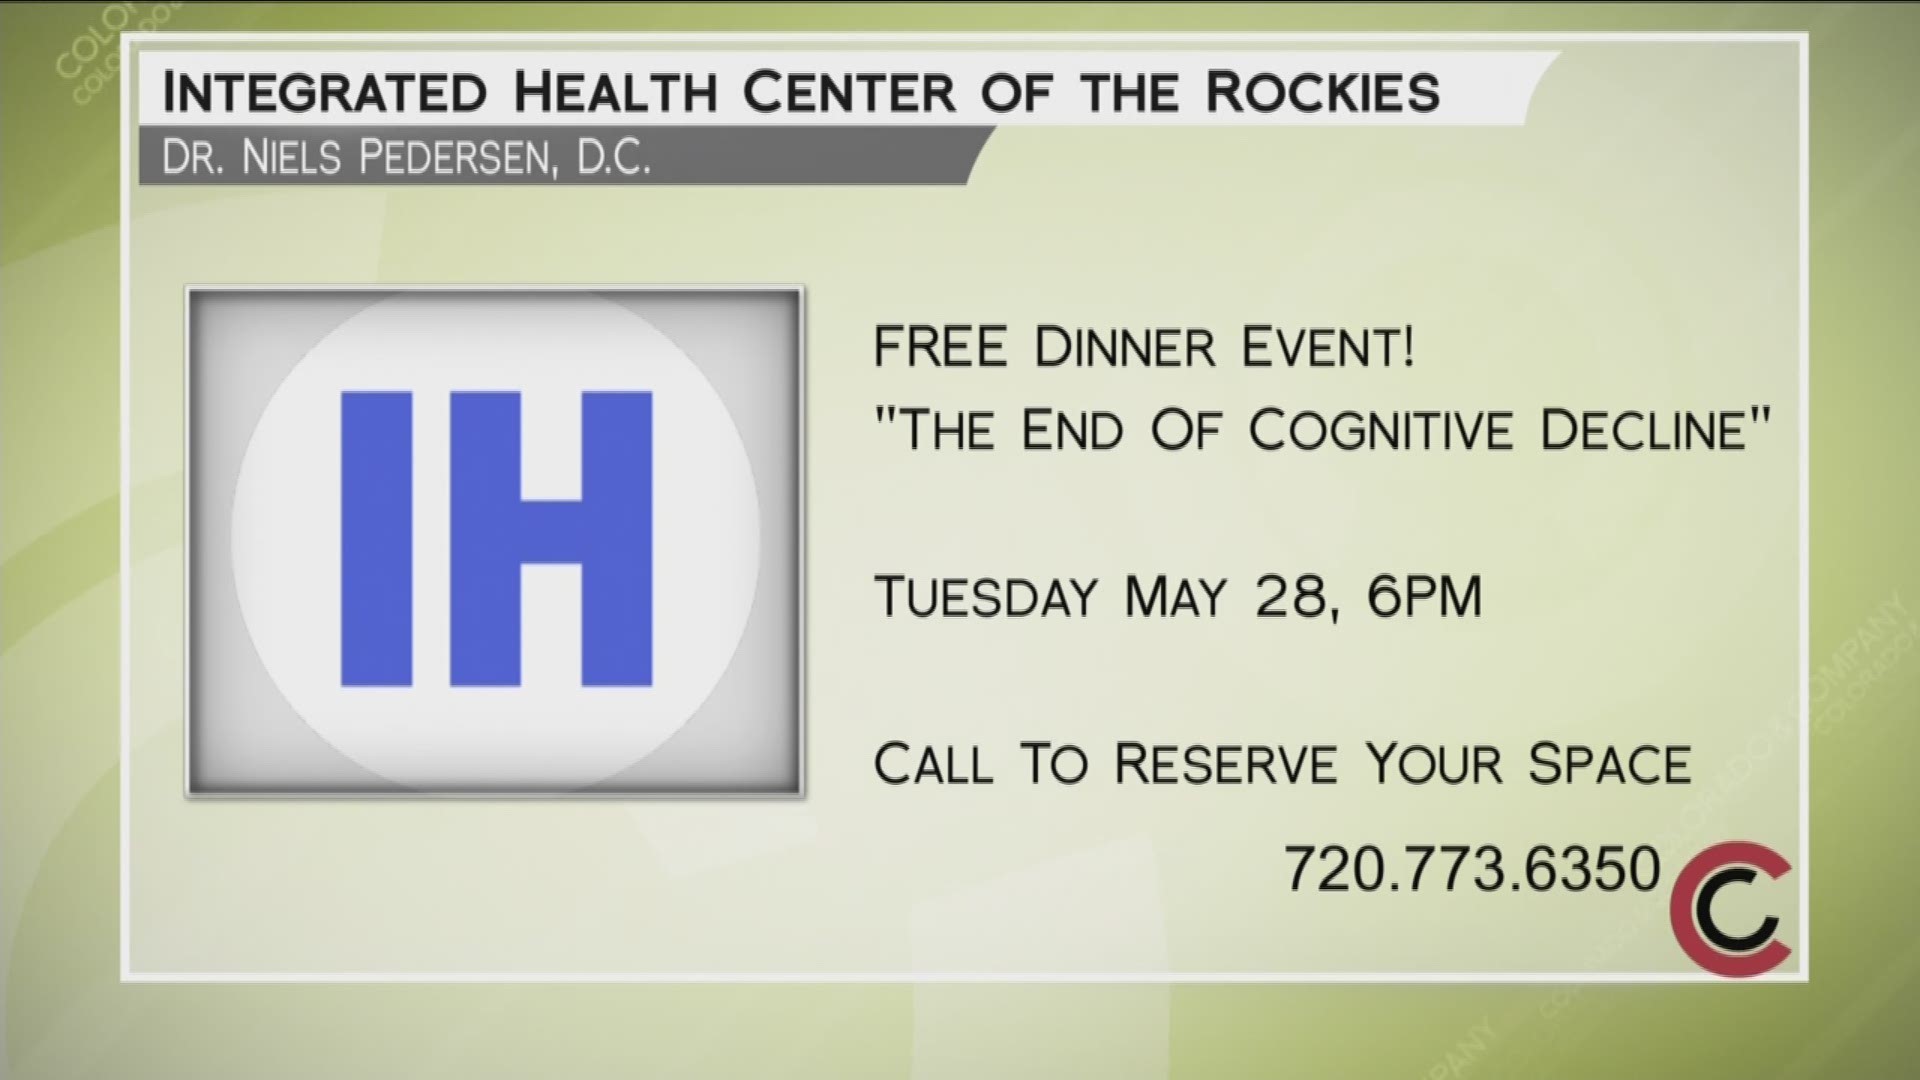 Reclaim your brain function. Call 720.773.6350 to see if you qualify to attend Integrated Health Center of the Rockies’ free informational dinner and seminar on May 28th. It’s called “The End of Cognitive Decline.” 
THIS INTERVIEW HAS COMMERCIAL CONTENT. PRODUCTS AND SERVICES FEATURED APPEAR AS PAID ADVERTISING.